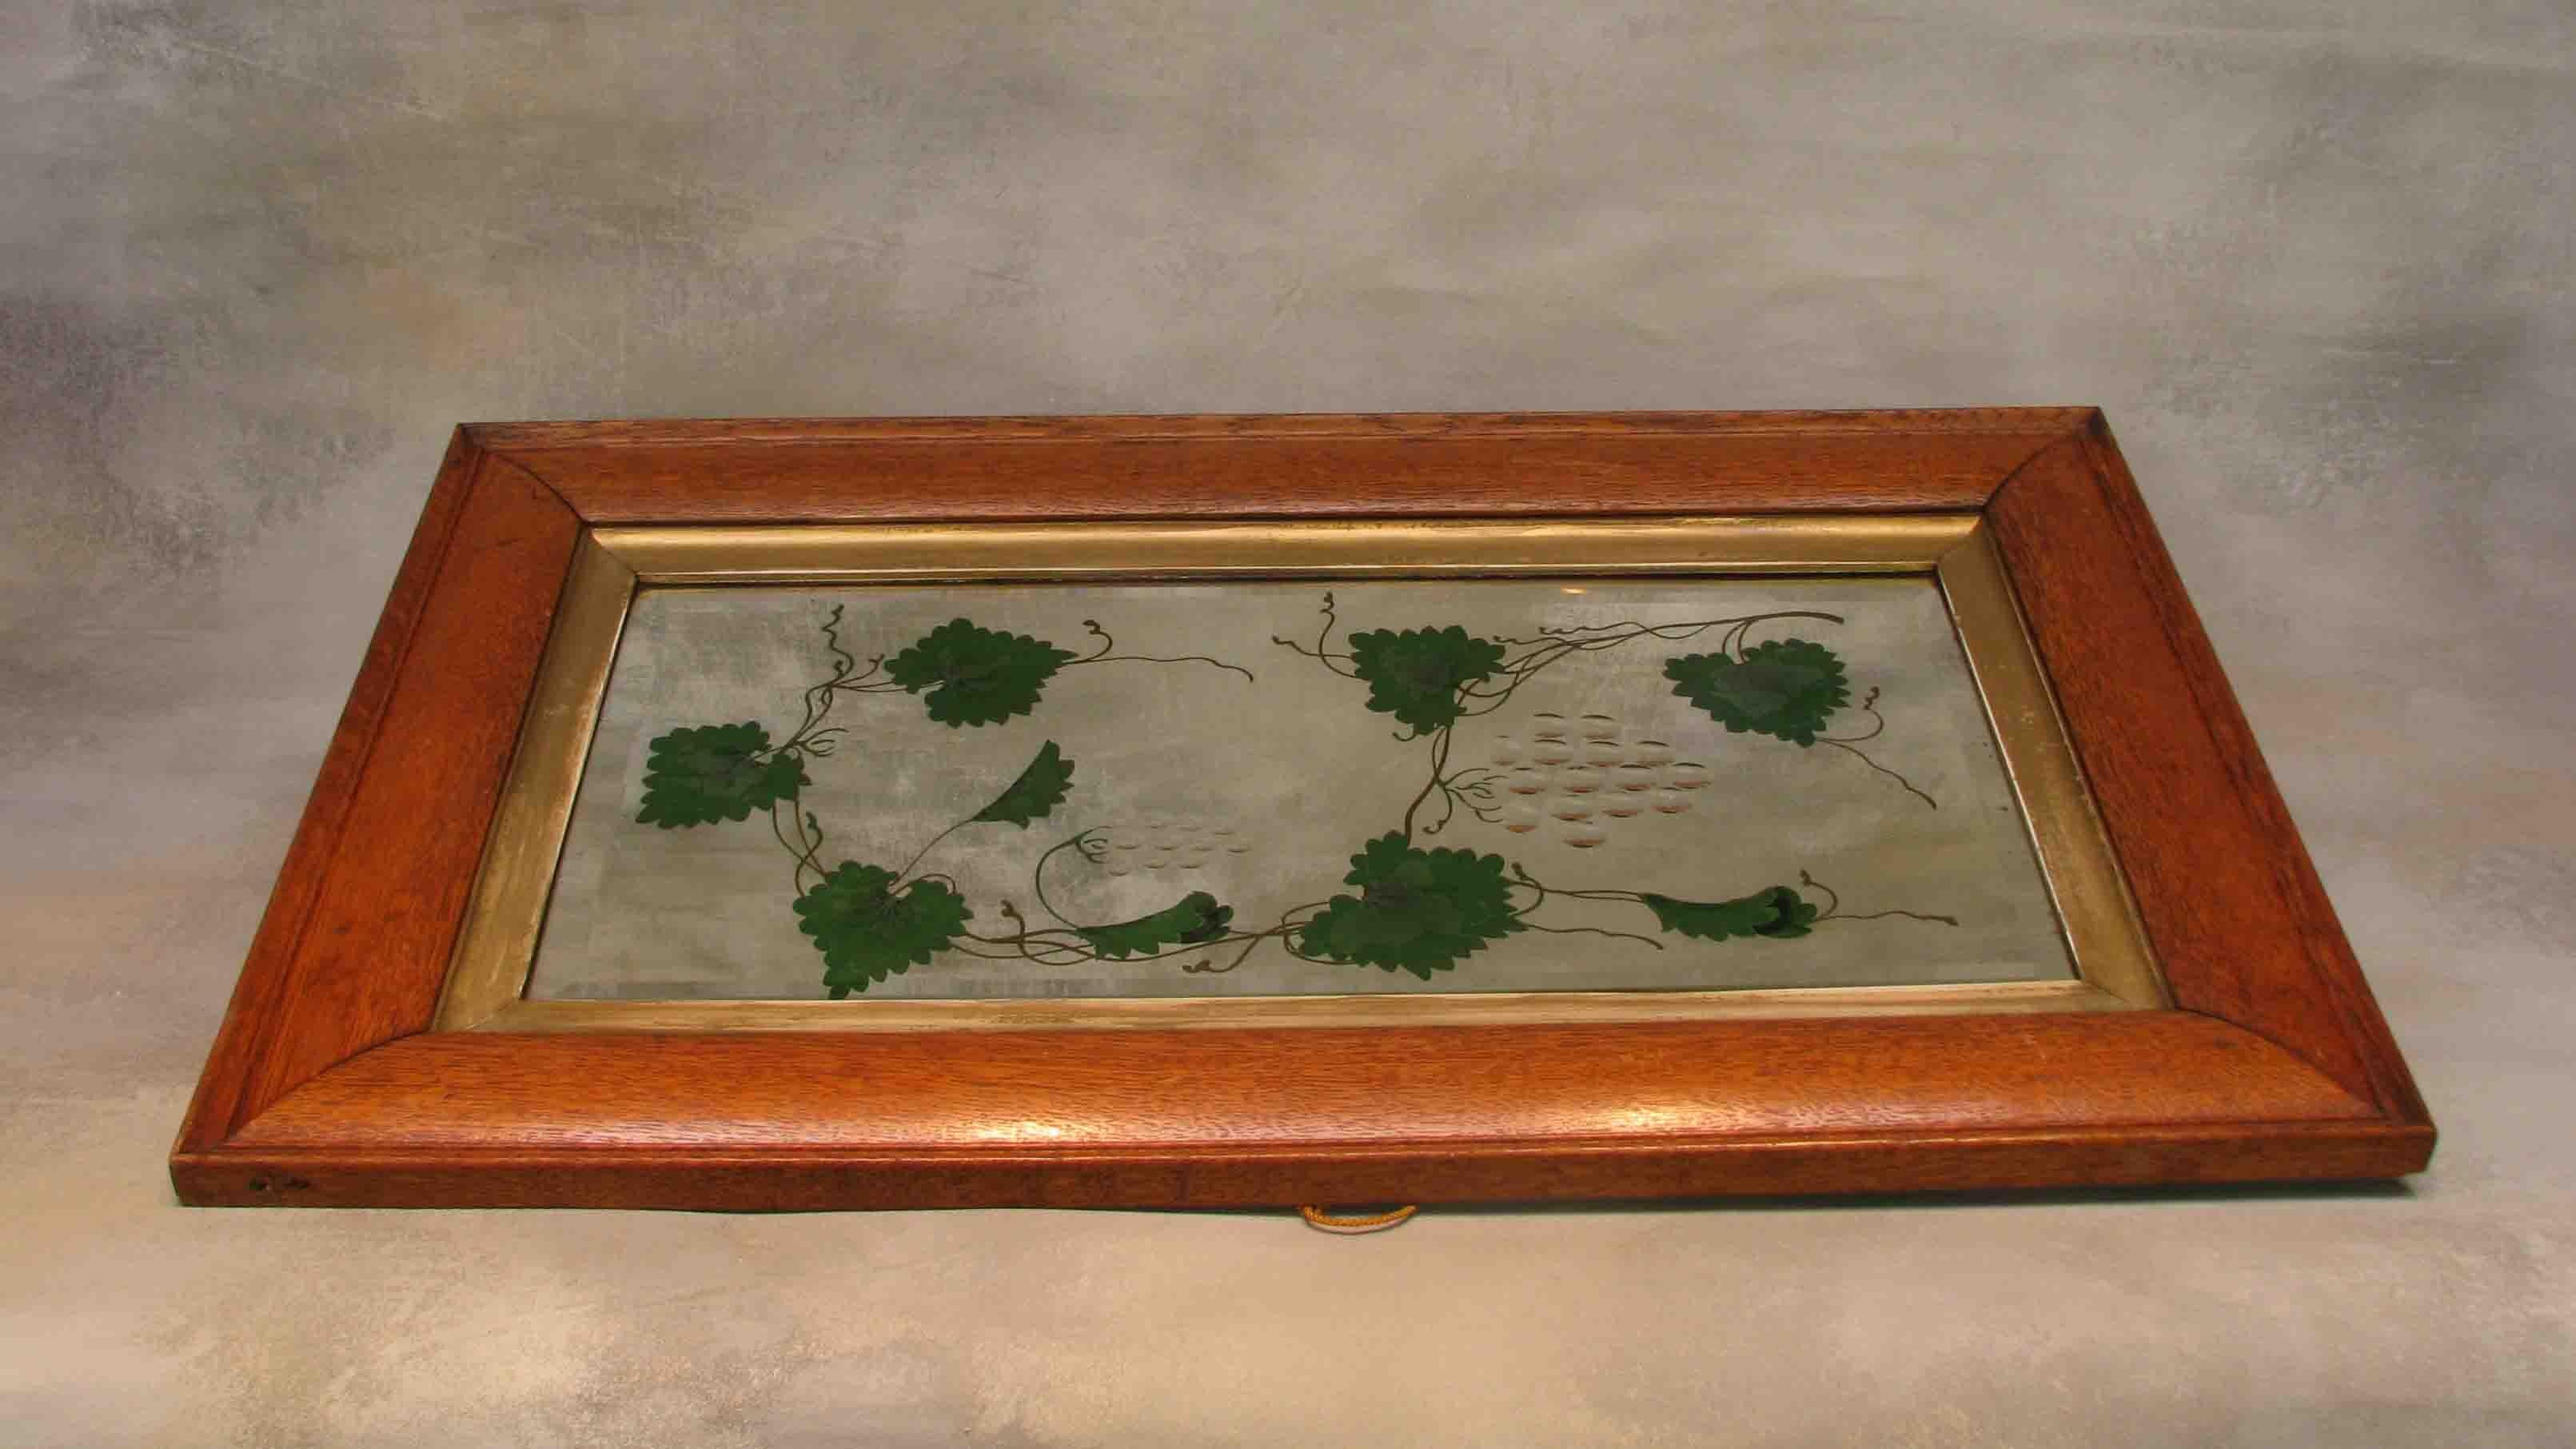 Unusual Arts and Crafts Verre Eglomise Mirror in Oak Frame In Good Condition For Sale In Ottawa, Ontario